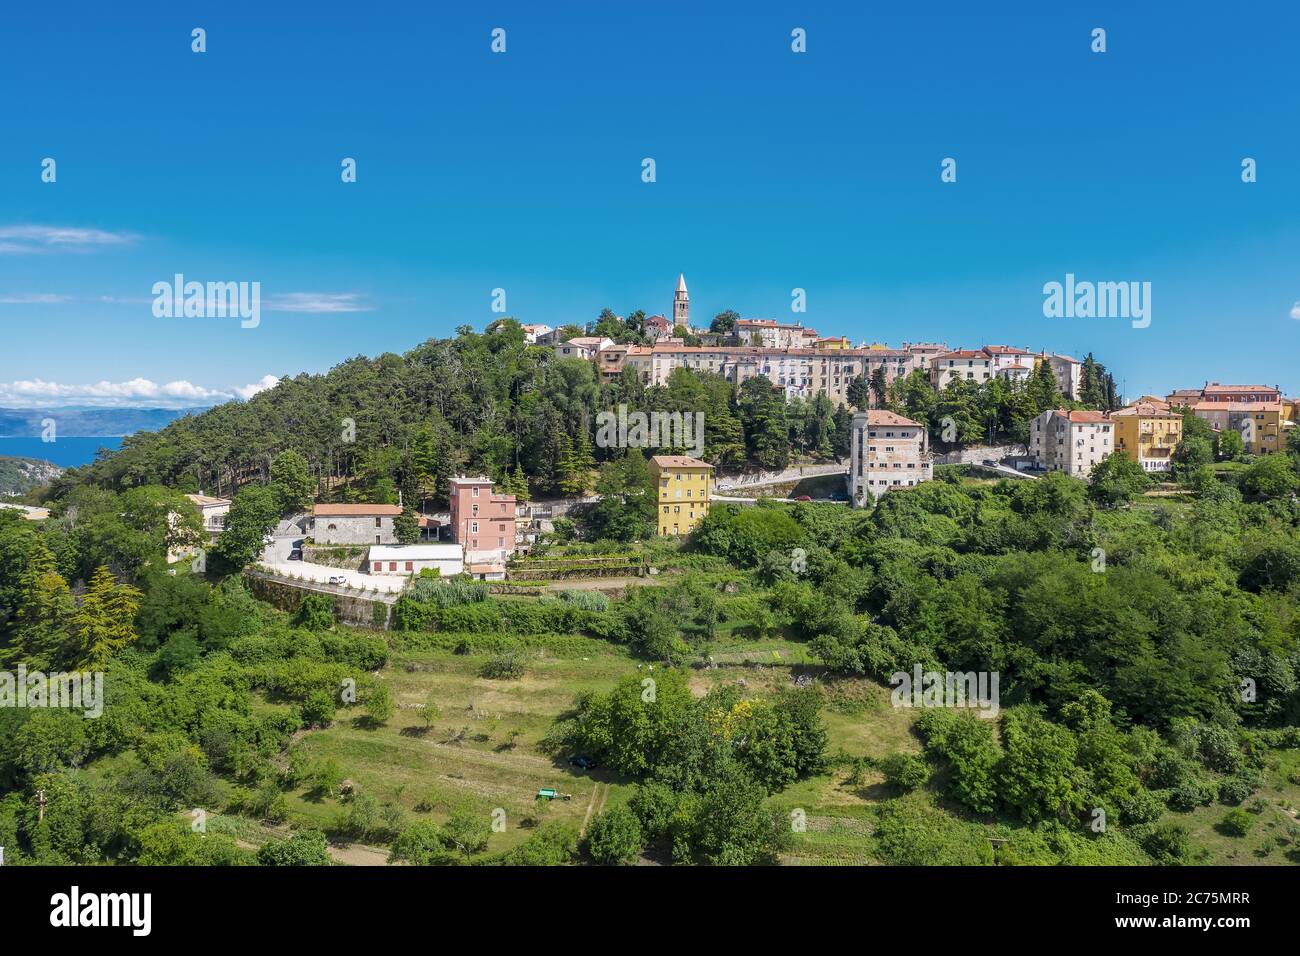 an aerial view of old town Labin, Istria, Croatia Stock Photo